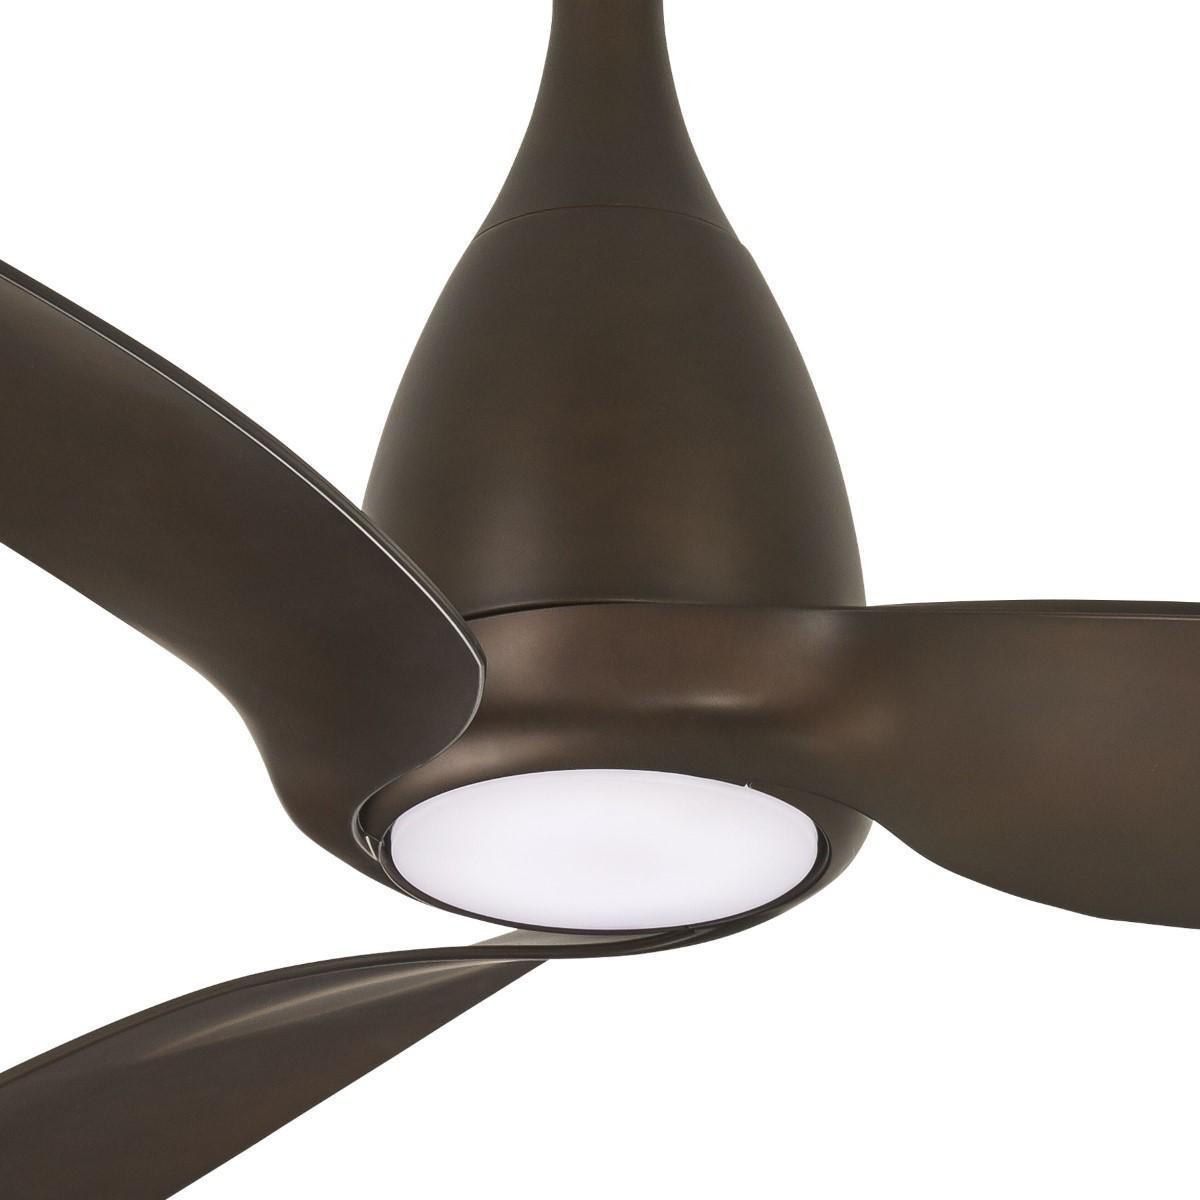 Tear 60 Inch Modern Propeller Ceiling Fan With Light And Remote